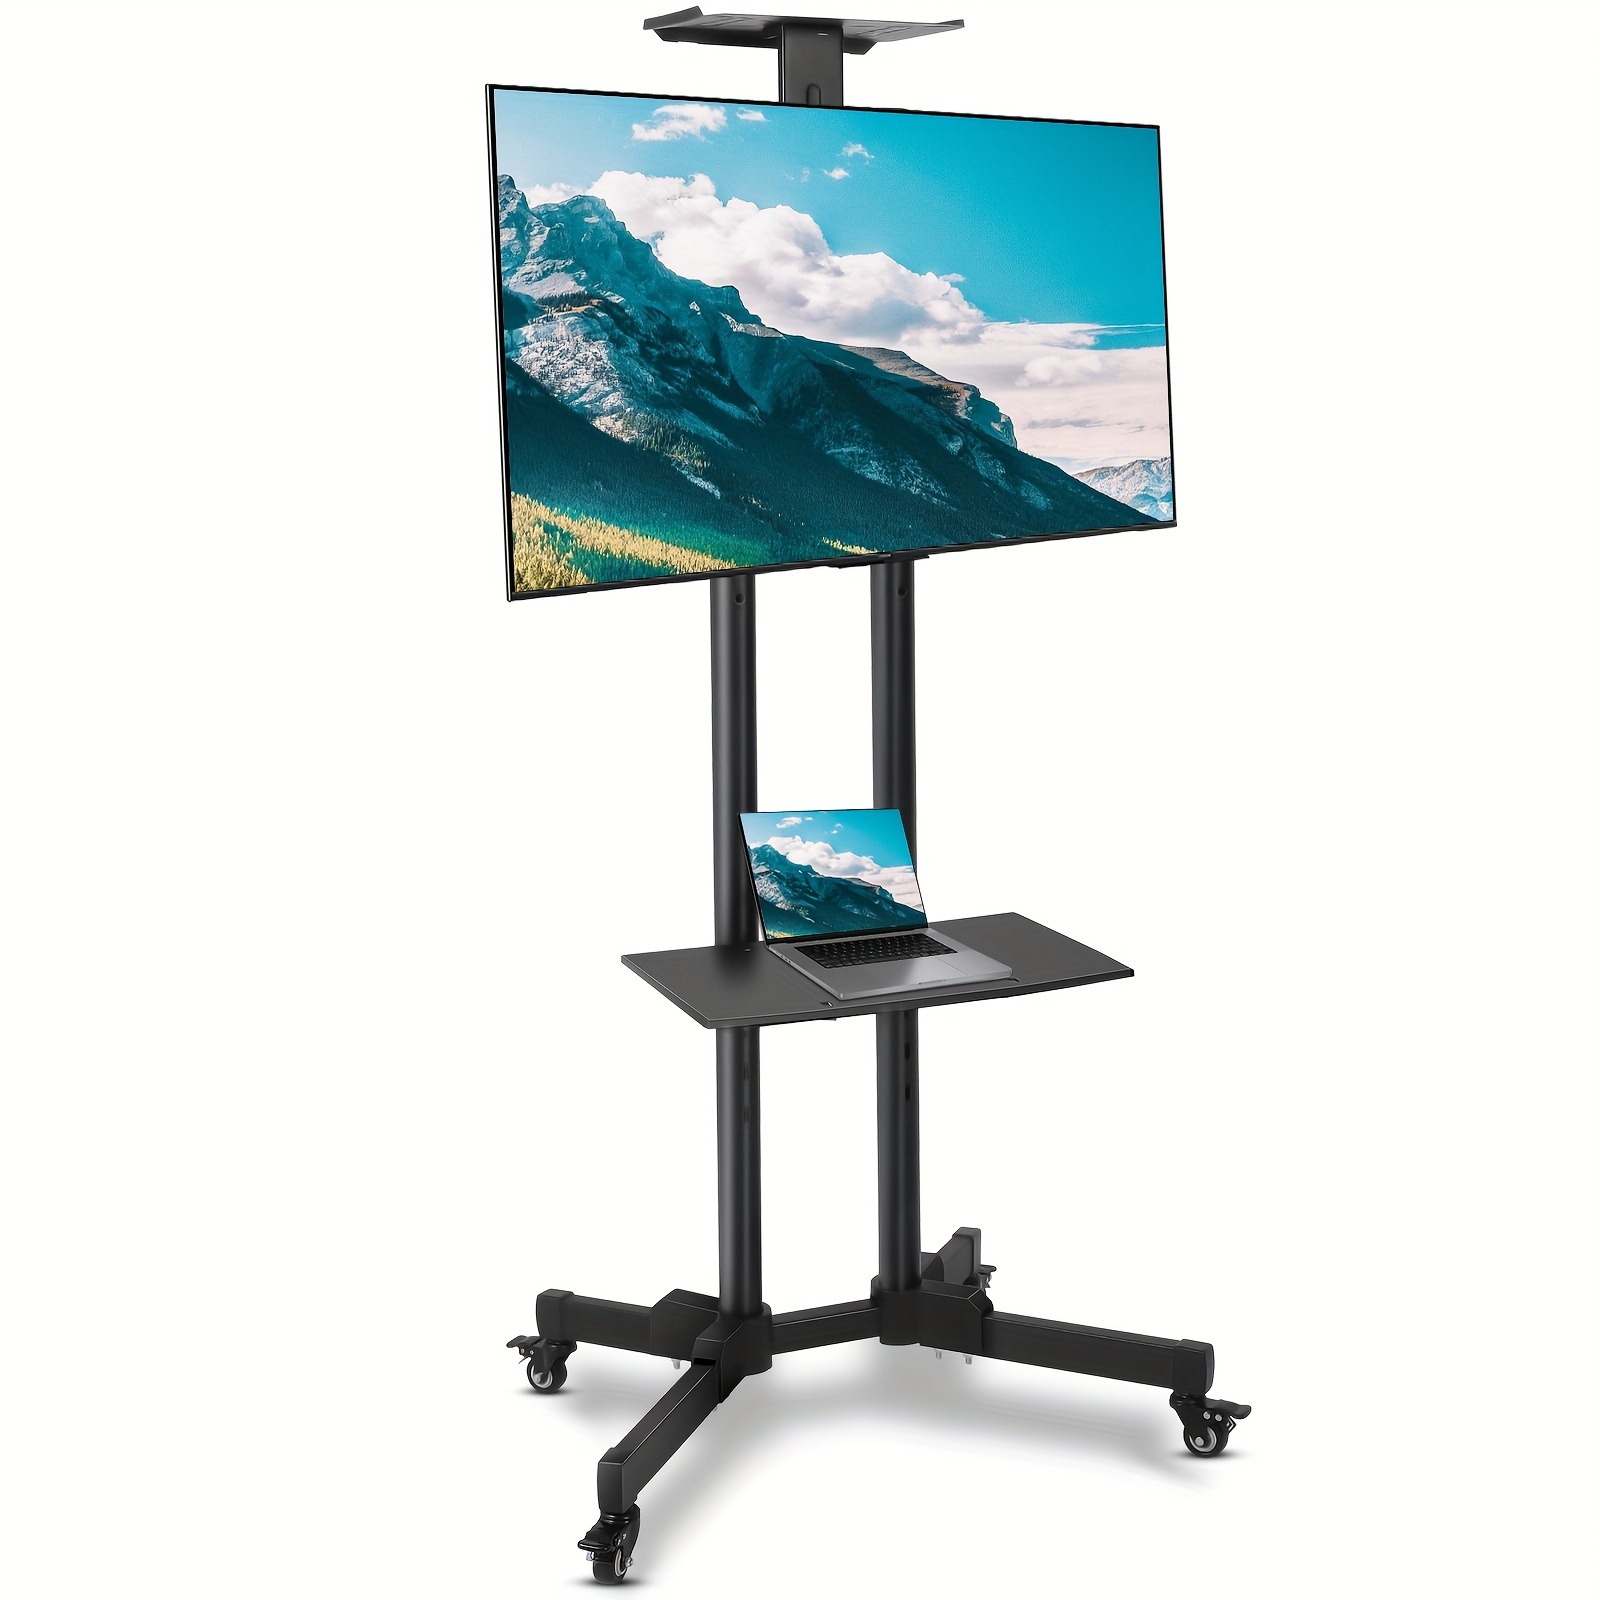 

Mobile Tv Cart With Wheels For 32-70 Inch Lcd Led Oled Flat Curved Screen Tvs Up To 110 Lbs Height Adjustable Portable Tv On Wheels With Laptop Dvd Shelf, Locking Wheels, Max Vesa 600x400mm